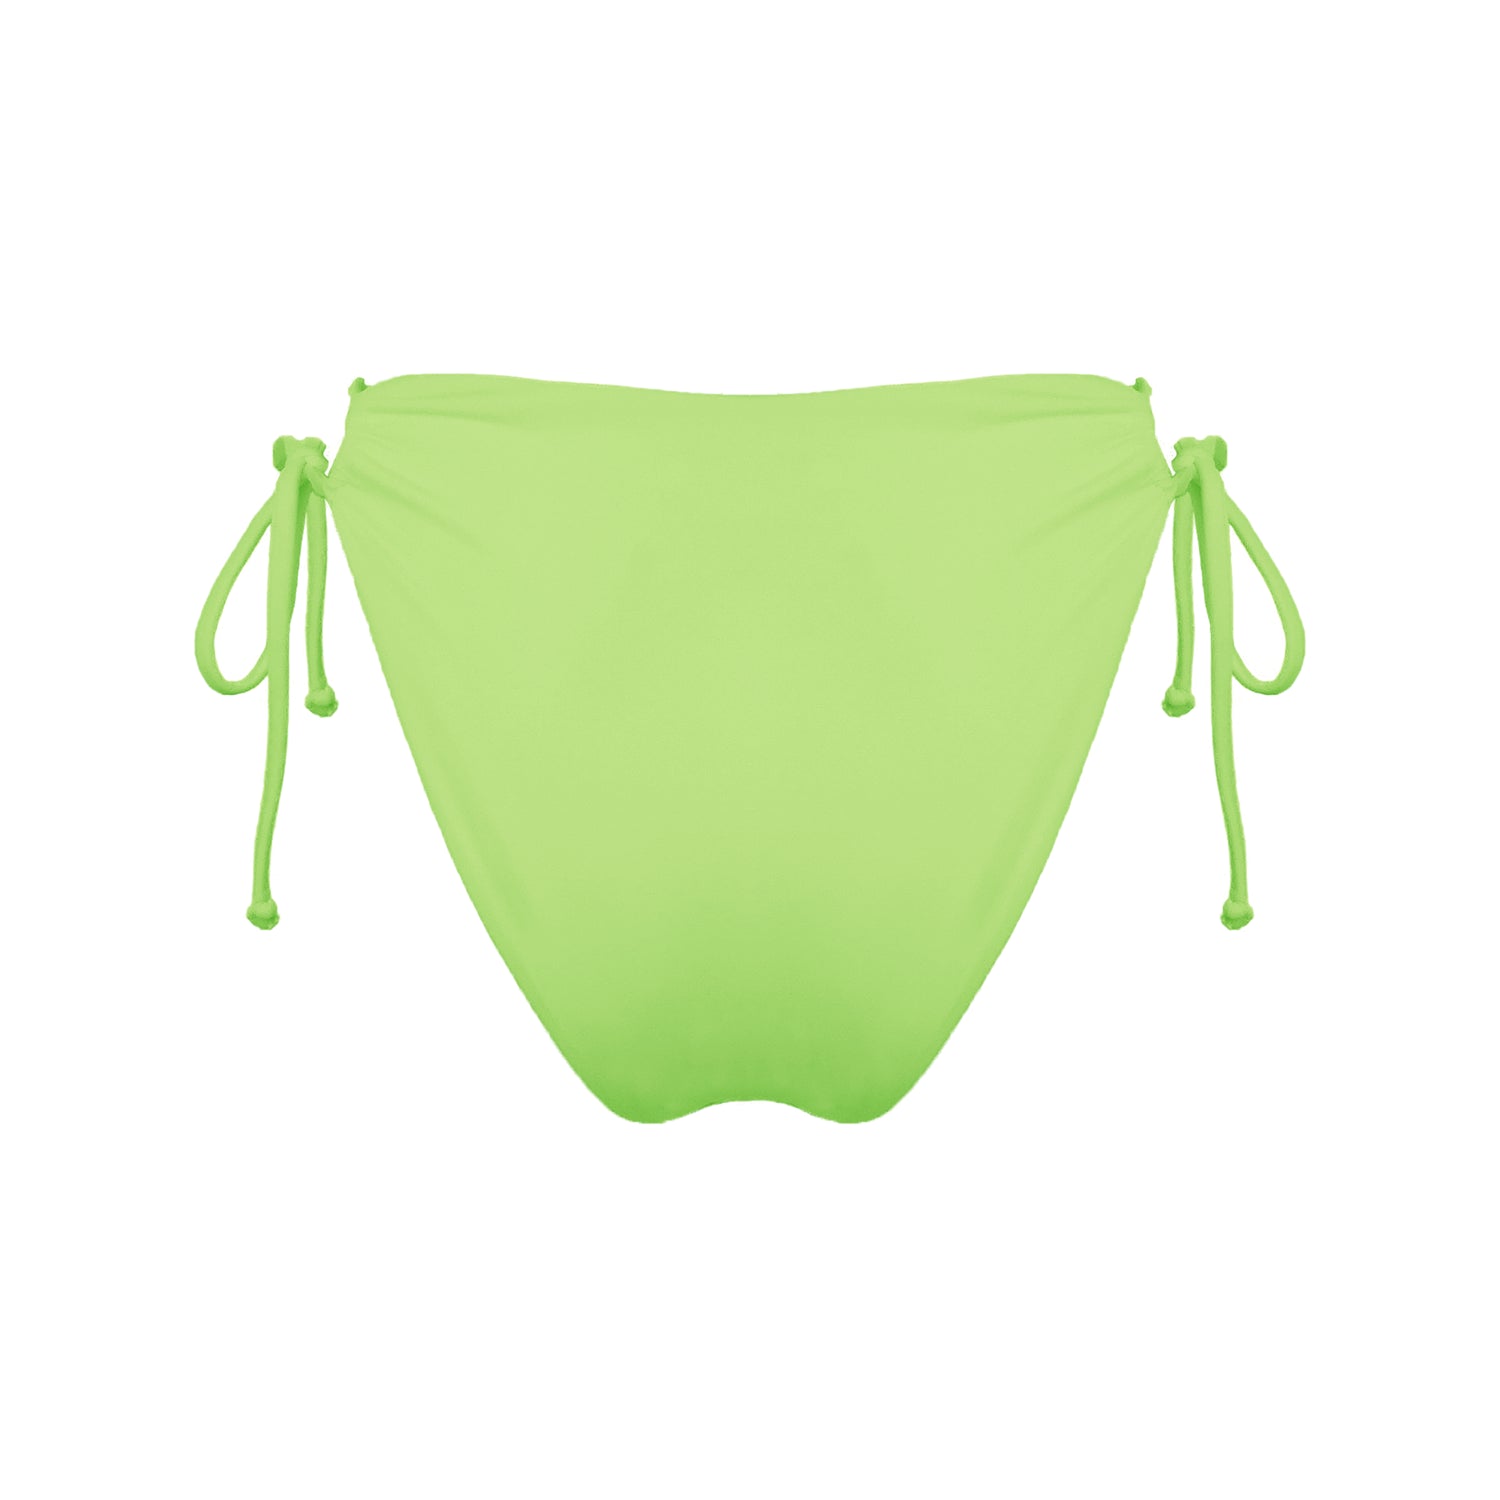 Back view of light neon green strappy mid-rise bikini bottoms with high cut legs and cheeky coverage.